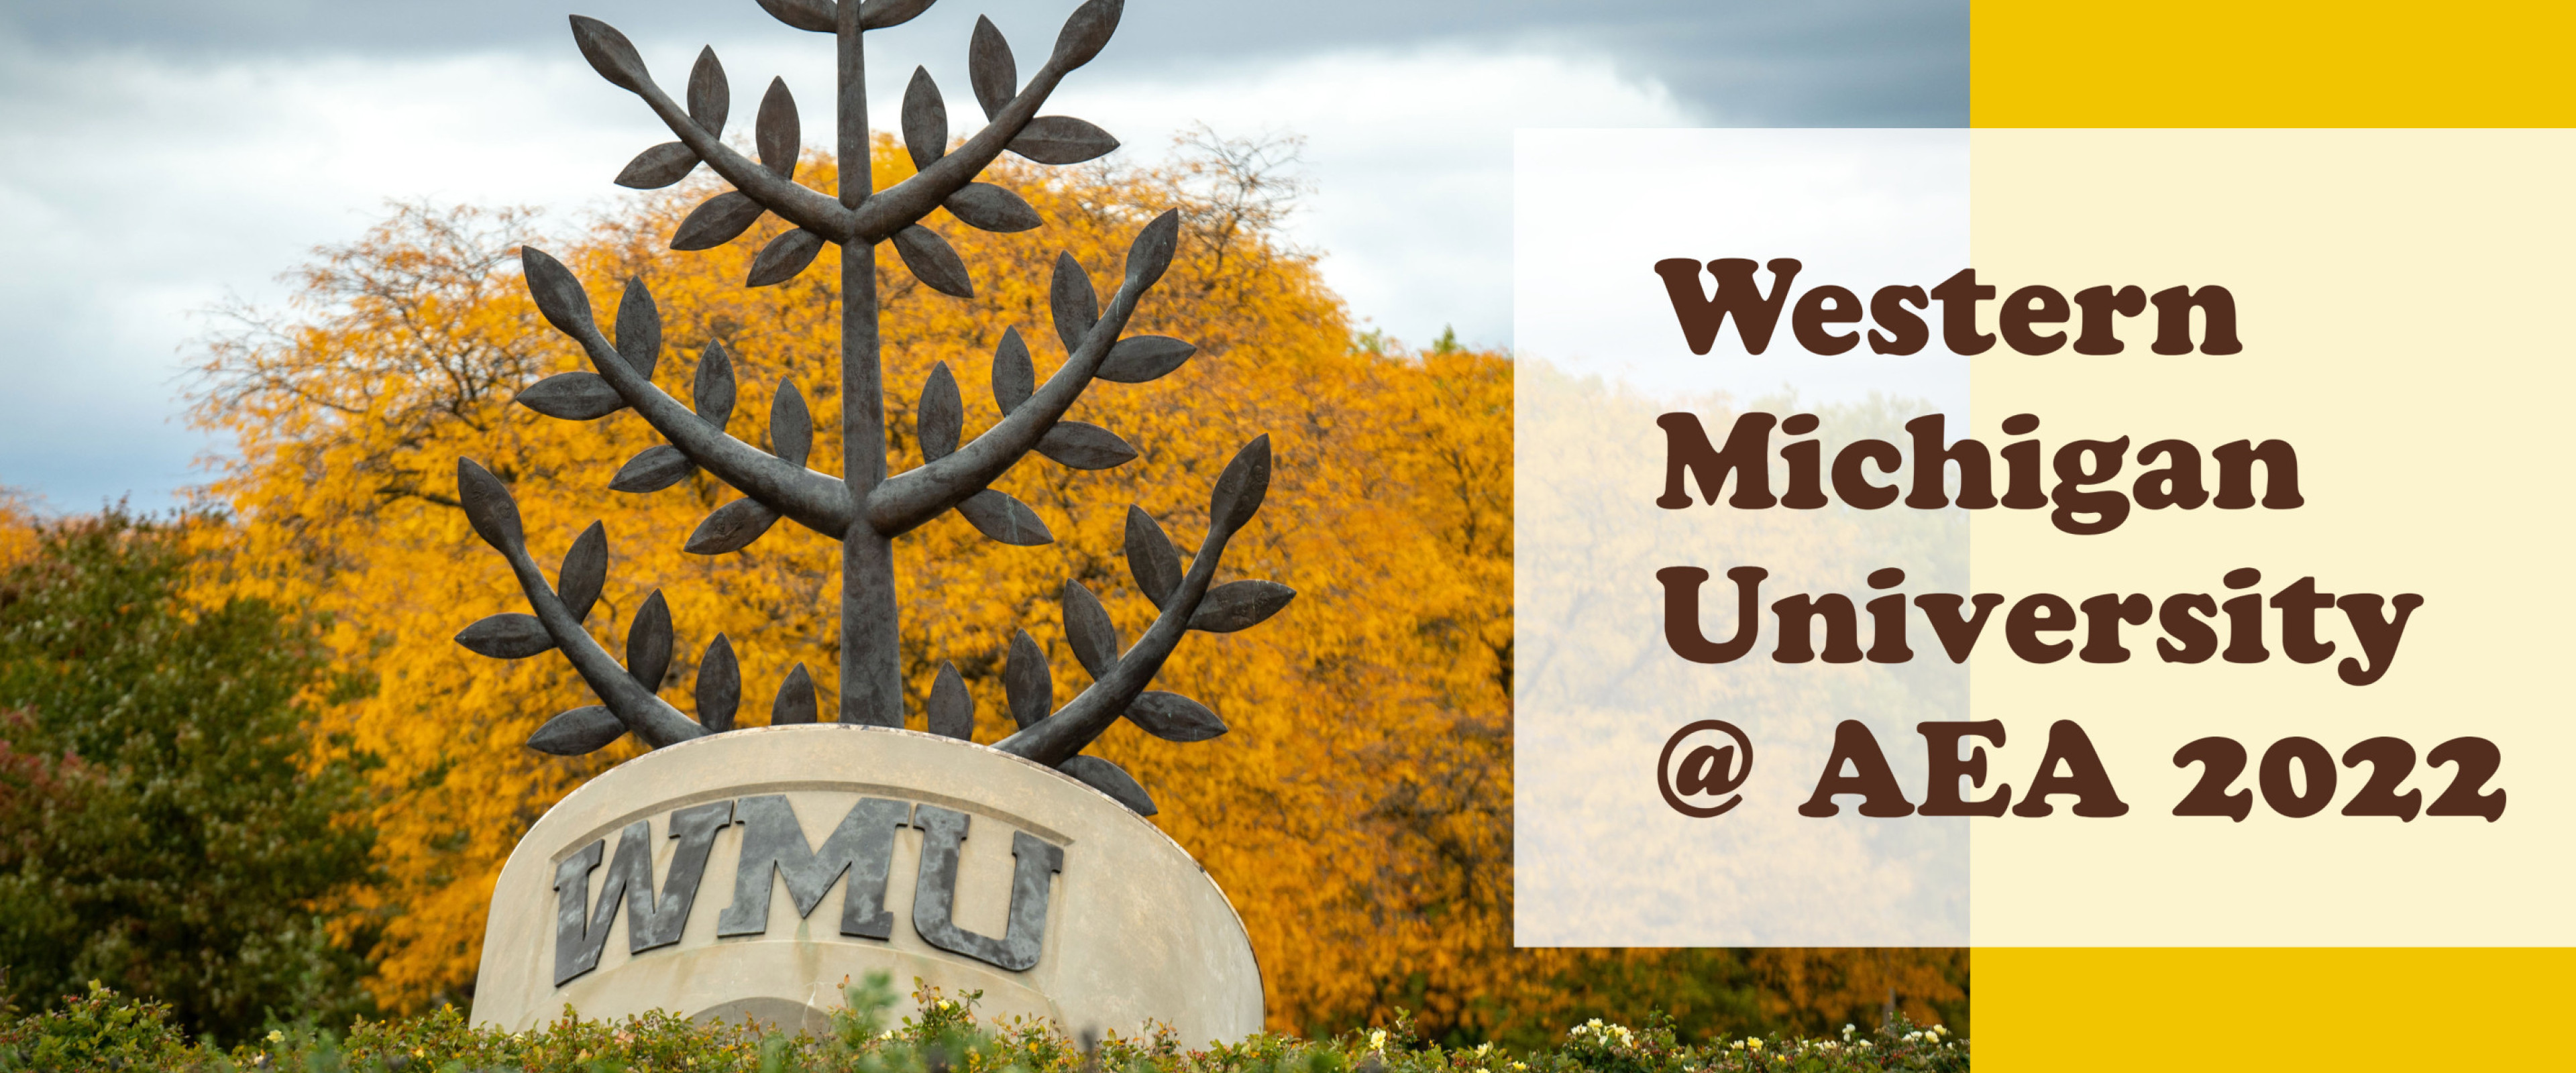 WMU seal sculpture in front of fall foilage